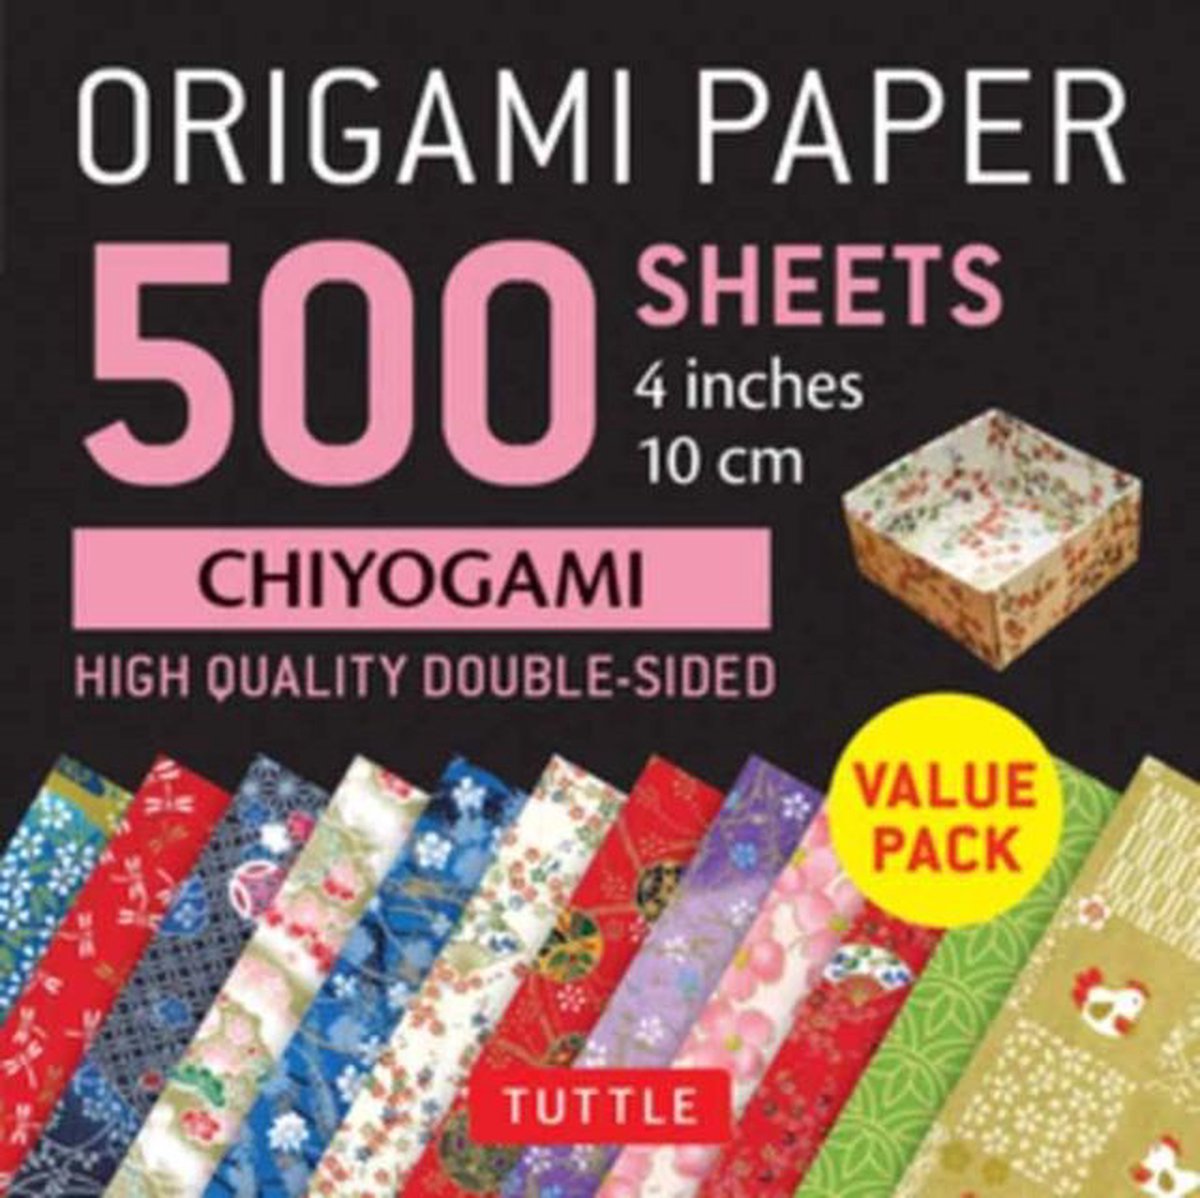 Origami Paper 500 sheets Chiyogami Patterns 4 (10 cm): Tuttle Origami Paper